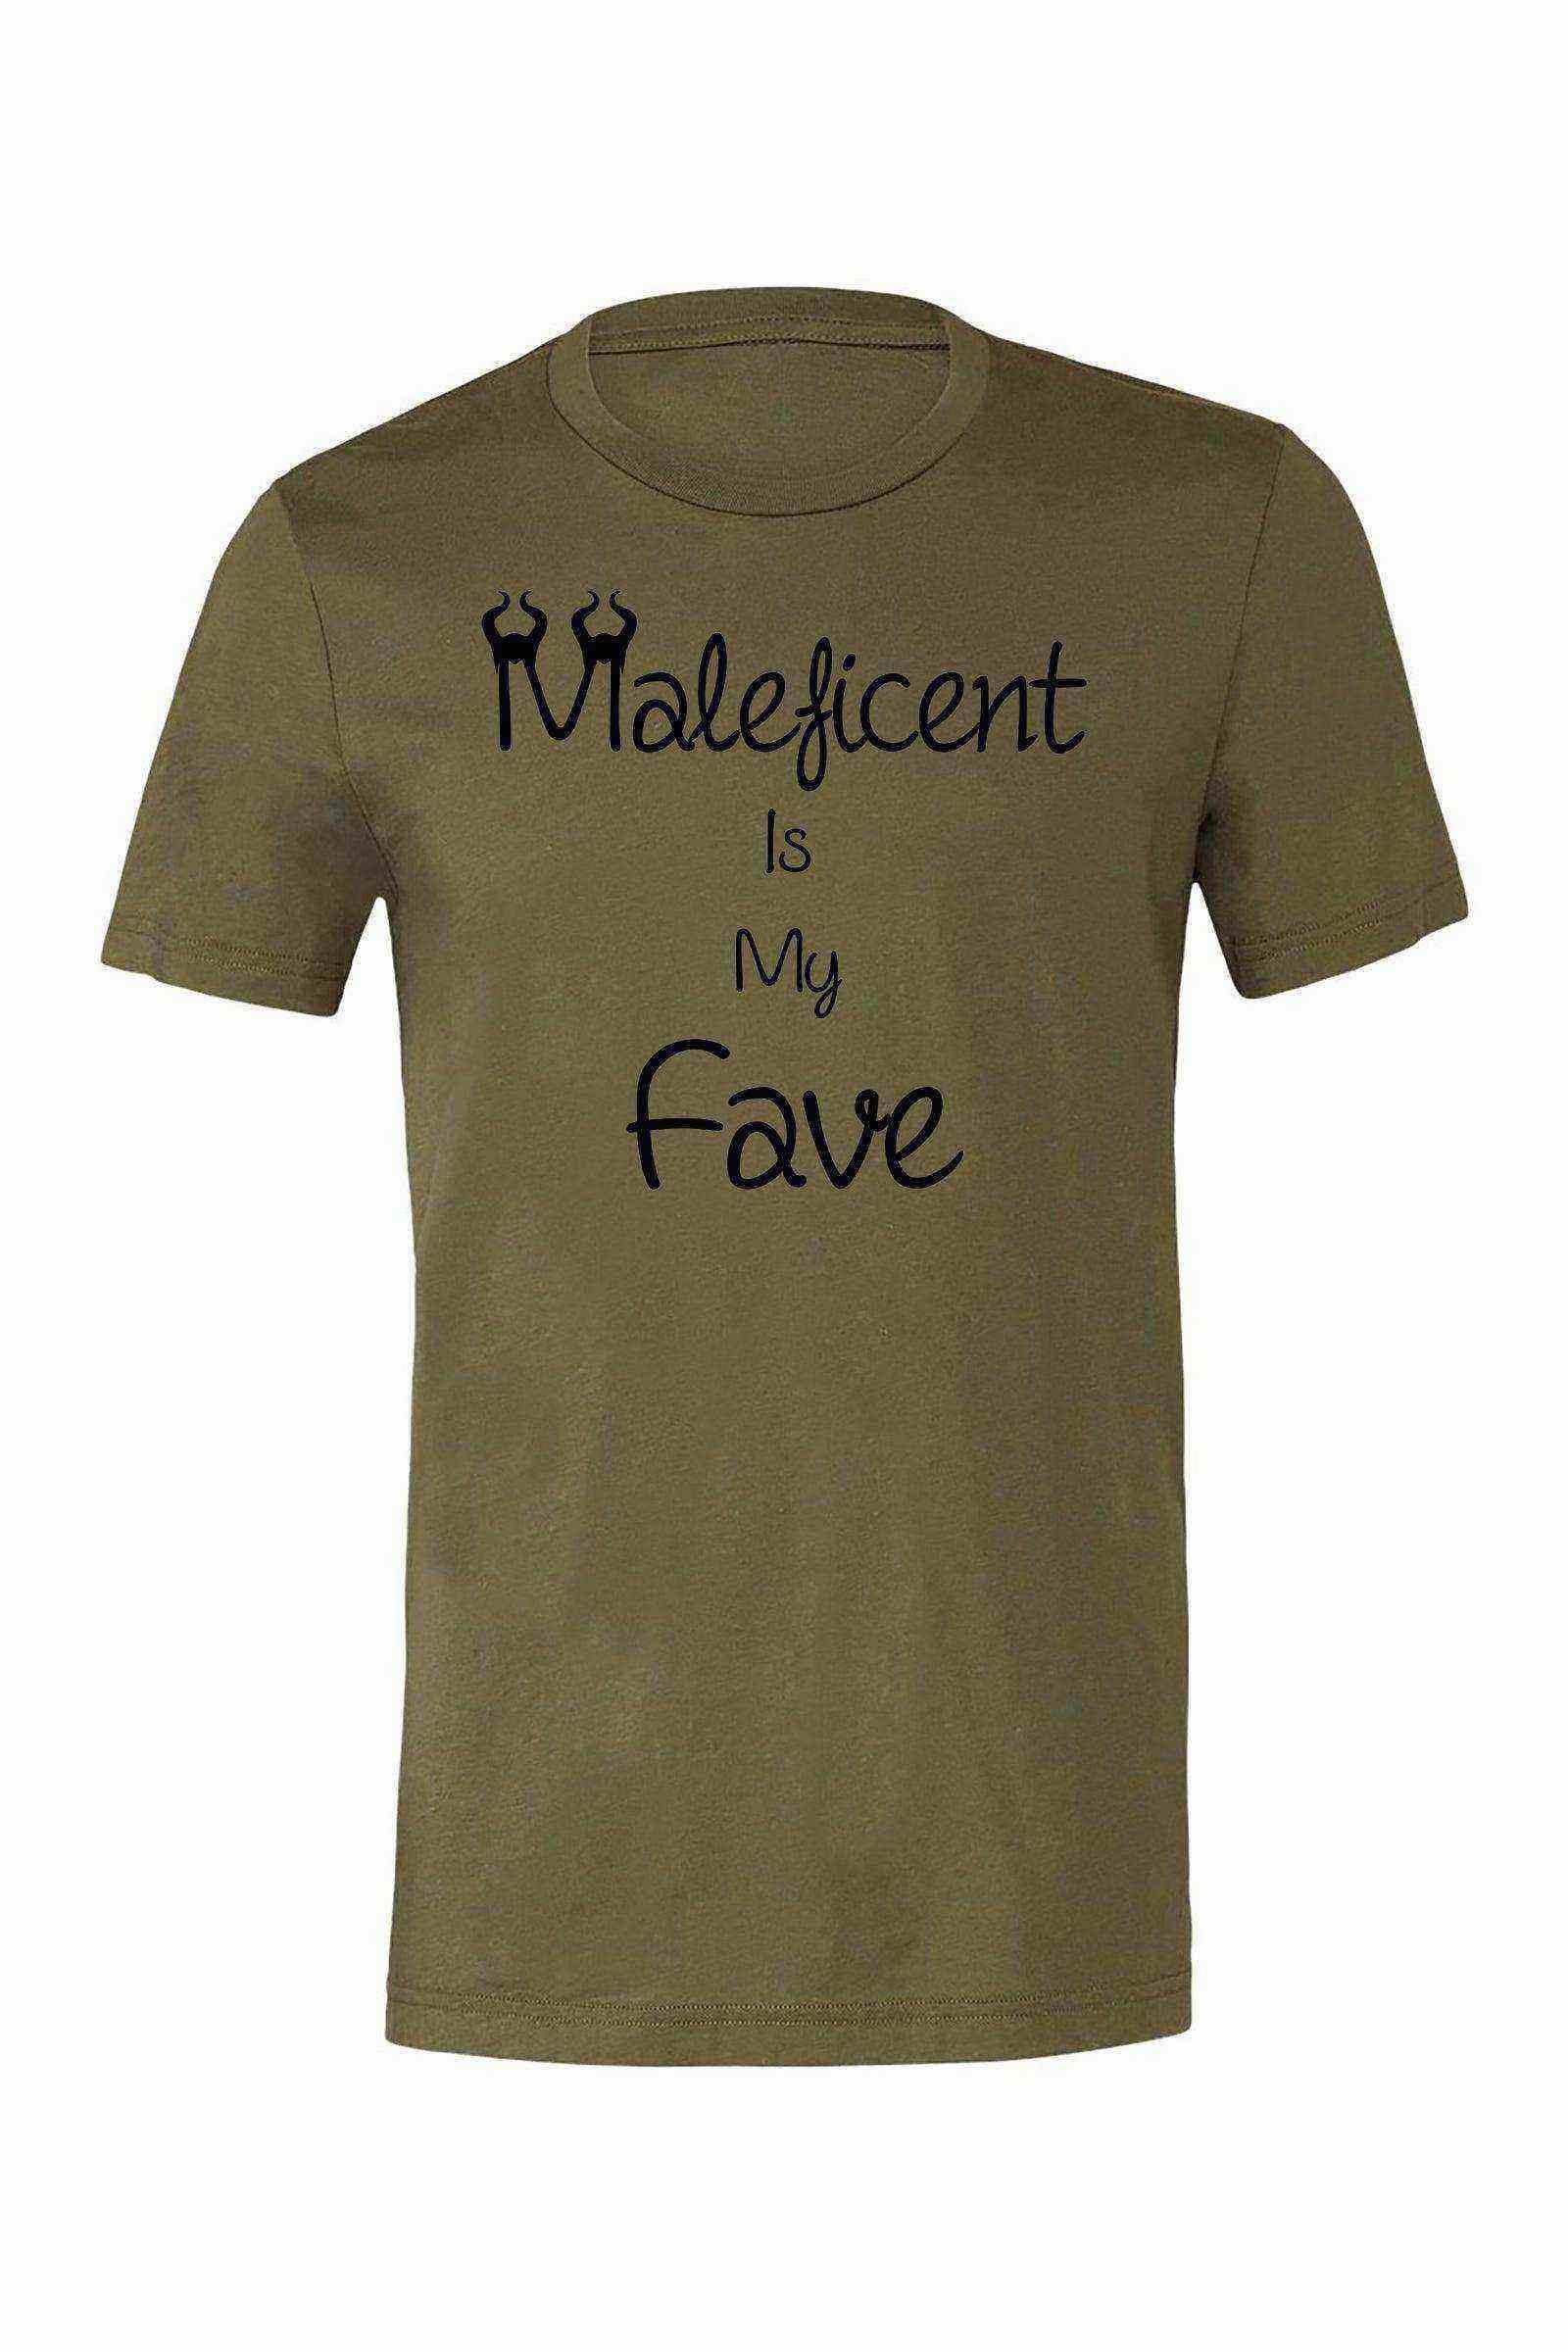 Toddler | Maleficent is my Fave Shirt - Dylan's Tees